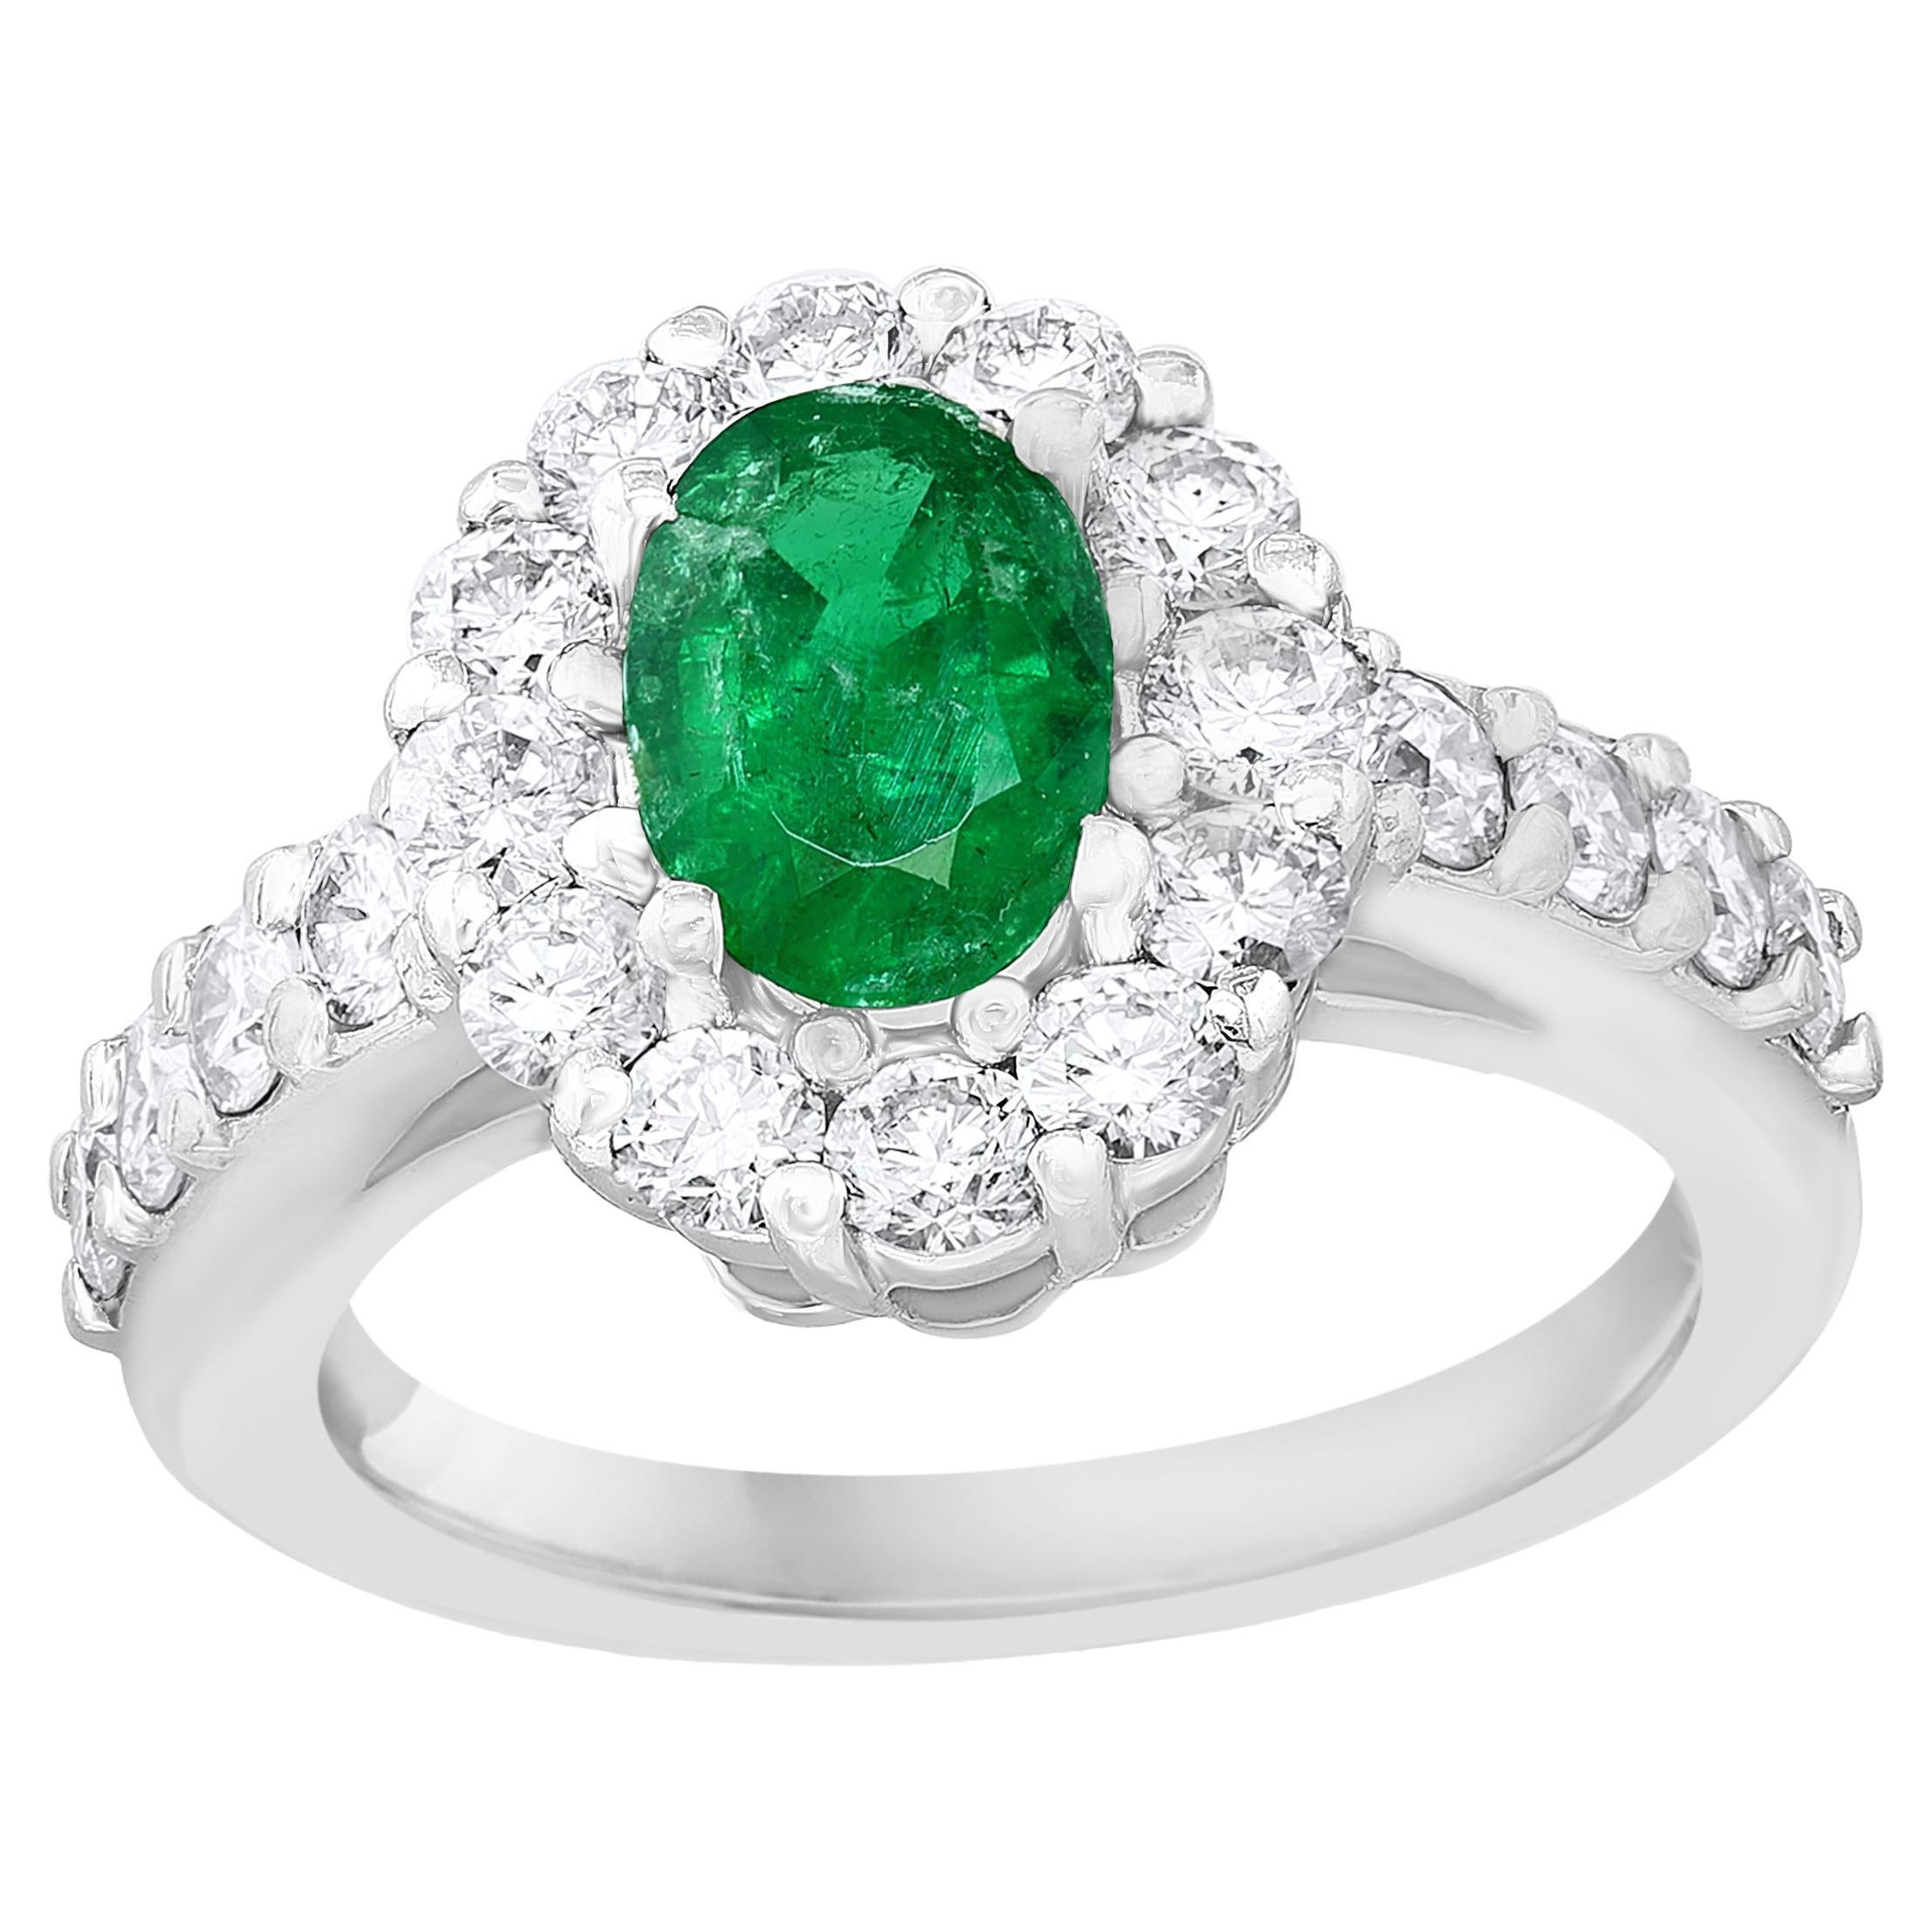 1.35 Carat Oval Cut Emerald and Diamond Engagement Ring in 14K White Gold For Sale